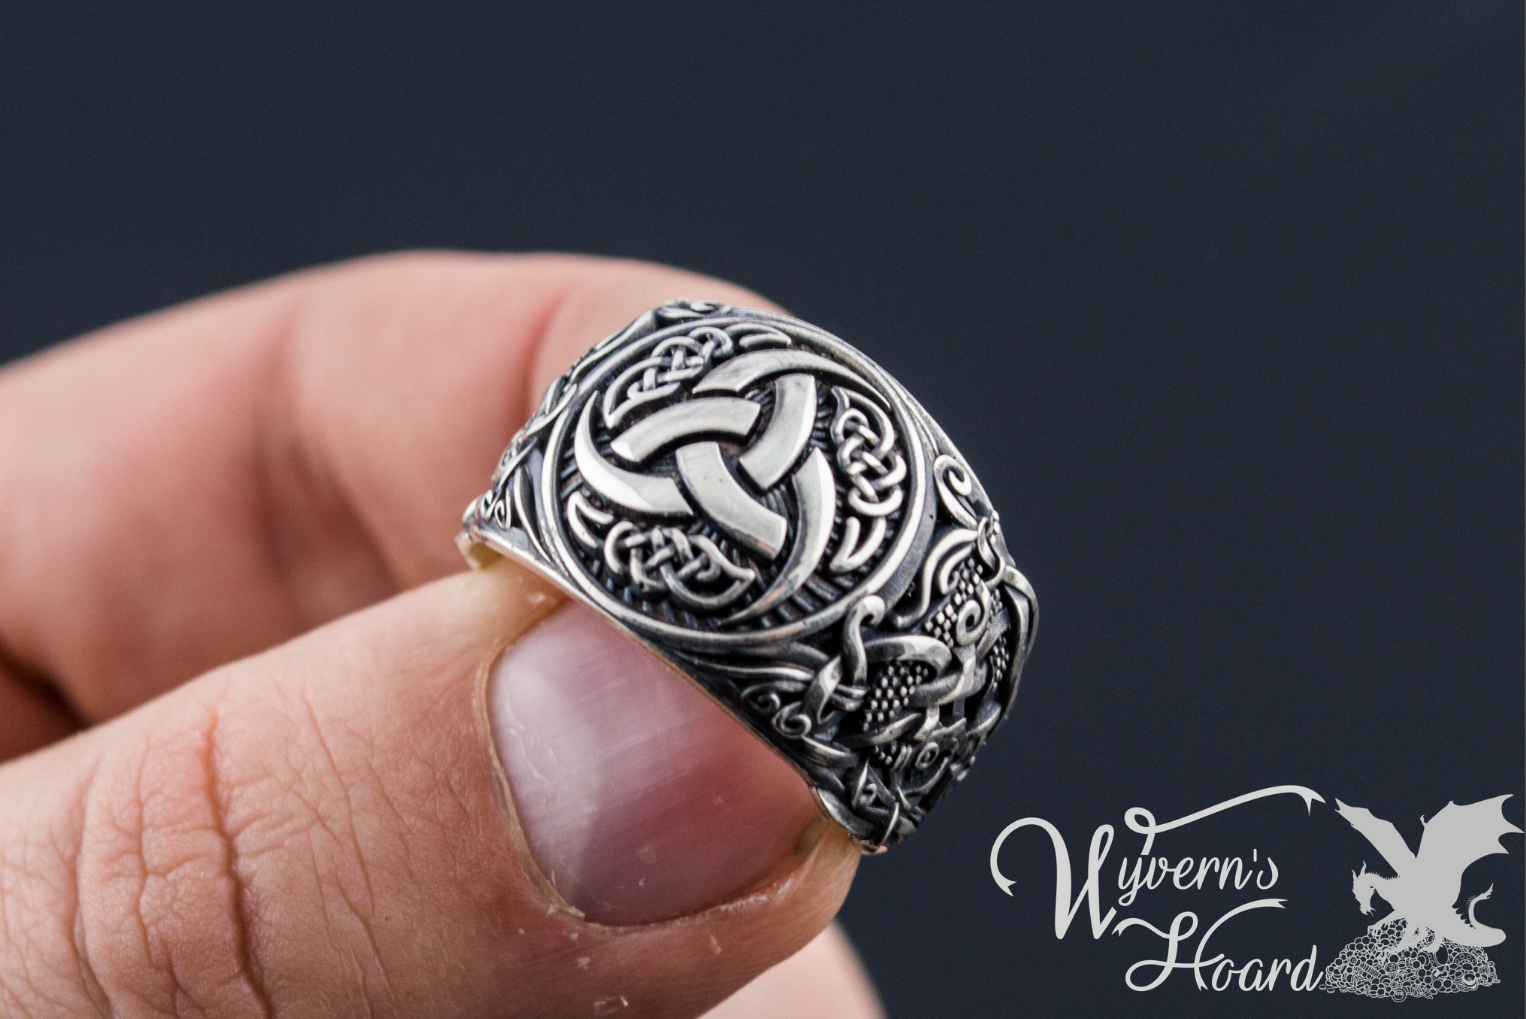 The Horns of Odin Sterling Silver Ring